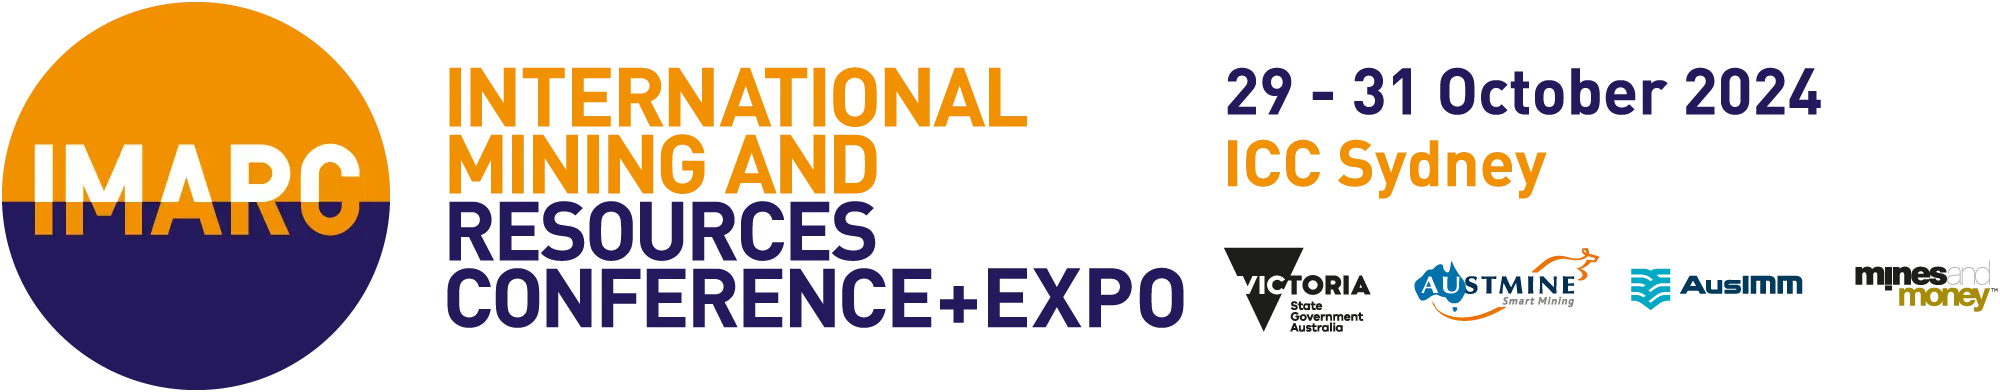 The International Mining and Resources Conference (IMARC)